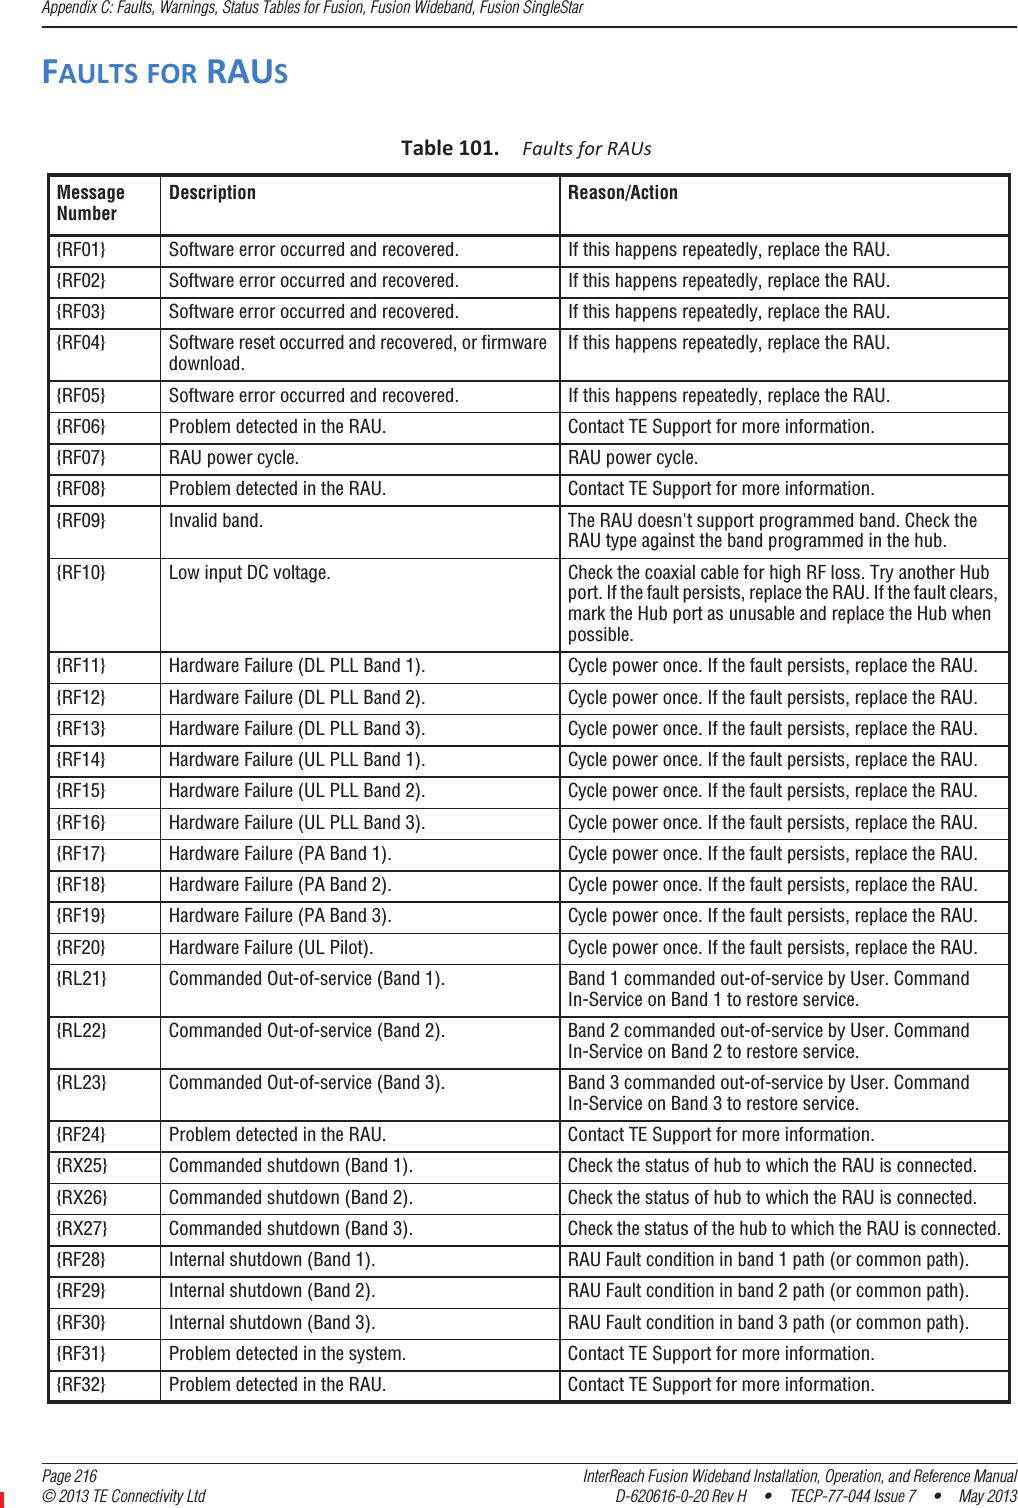 Appendix C: Faults, Warnings, Status Tables for Fusion, Fusion Wideband, Fusion SingleStar  Page 216 InterReach Fusion Wideband Installation, Operation, and Reference Manual© 2013 TE Connectivity Ltd D-620616-0-20 Rev H  •  TECP-77-044 Issue 7  •  May 2013FAULTSFORRAUSTable101.FaultsforRAUsMessage NumberDescription Reason/Action{RF01} Software error occurred and recovered. If this happens repeatedly, replace the RAU.{RF02} Software error occurred and recovered. If this happens repeatedly, replace the RAU.{RF03} Software error occurred and recovered. If this happens repeatedly, replace the RAU.{RF04} Software reset occurred and recovered, or firmware download.If this happens repeatedly, replace the RAU.{RF05} Software error occurred and recovered. If this happens repeatedly, replace the RAU.{RF06} Problem detected in the RAU. Contact TE Support for more information.{RF07} RAU power cycle. RAU power cycle.{RF08} Problem detected in the RAU. Contact TE Support for more information.{RF09} Invalid band. The RAU doesn&apos;t support programmed band. Check the RAU type against the band programmed in the hub.{RF10} Low input DC voltage. Check the coaxial cable for high RF loss. Try another Hub port. If the fault persists, replace the RAU. If the fault clears, mark the Hub port as unusable and replace the Hub when possible.{RF11} Hardware Failure (DL PLL Band 1). Cycle power once. If the fault persists, replace the RAU.{RF12} Hardware Failure (DL PLL Band 2). Cycle power once. If the fault persists, replace the RAU.{RF13} Hardware Failure (DL PLL Band 3). Cycle power once. If the fault persists, replace the RAU.{RF14} Hardware Failure (UL PLL Band 1). Cycle power once. If the fault persists, replace the RAU.{RF15} Hardware Failure (UL PLL Band 2). Cycle power once. If the fault persists, replace the RAU.{RF16} Hardware Failure (UL PLL Band 3). Cycle power once. If the fault persists, replace the RAU.{RF17} Hardware Failure (PA Band 1). Cycle power once. If the fault persists, replace the RAU.{RF18} Hardware Failure (PA Band 2). Cycle power once. If the fault persists, replace the RAU.{RF19} Hardware Failure (PA Band 3). Cycle power once. If the fault persists, replace the RAU.{RF20} Hardware Failure (UL Pilot). Cycle power once. If the fault persists, replace the RAU.{RL21} Commanded Out-of-service (Band 1). Band 1 commanded out-of-service by User. Command In-Service on Band 1 to restore service.{RL22} Commanded Out-of-service (Band 2). Band 2 commanded out-of-service by User. Command In-Service on Band 2 to restore service.{RL23} Commanded Out-of-service (Band 3). Band 3 commanded out-of-service by User. Command In-Service on Band 3 to restore service.{RF24} Problem detected in the RAU. Contact TE Support for more information.{RX25} Commanded shutdown (Band 1). Check the status of hub to which the RAU is connected.{RX26} Commanded shutdown (Band 2). Check the status of hub to which the RAU is connected.{RX27} Commanded shutdown (Band 3). Check the status of the hub to which the RAU is connected.{RF28} Internal shutdown (Band 1). RAU Fault condition in band 1 path (or common path).{RF29} Internal shutdown (Band 2). RAU Fault condition in band 2 path (or common path).{RF30} Internal shutdown (Band 3). RAU Fault condition in band 3 path (or common path).{RF31} Problem detected in the system. Contact TE Support for more information.{RF32} Problem detected in the RAU. Contact TE Support for more information.